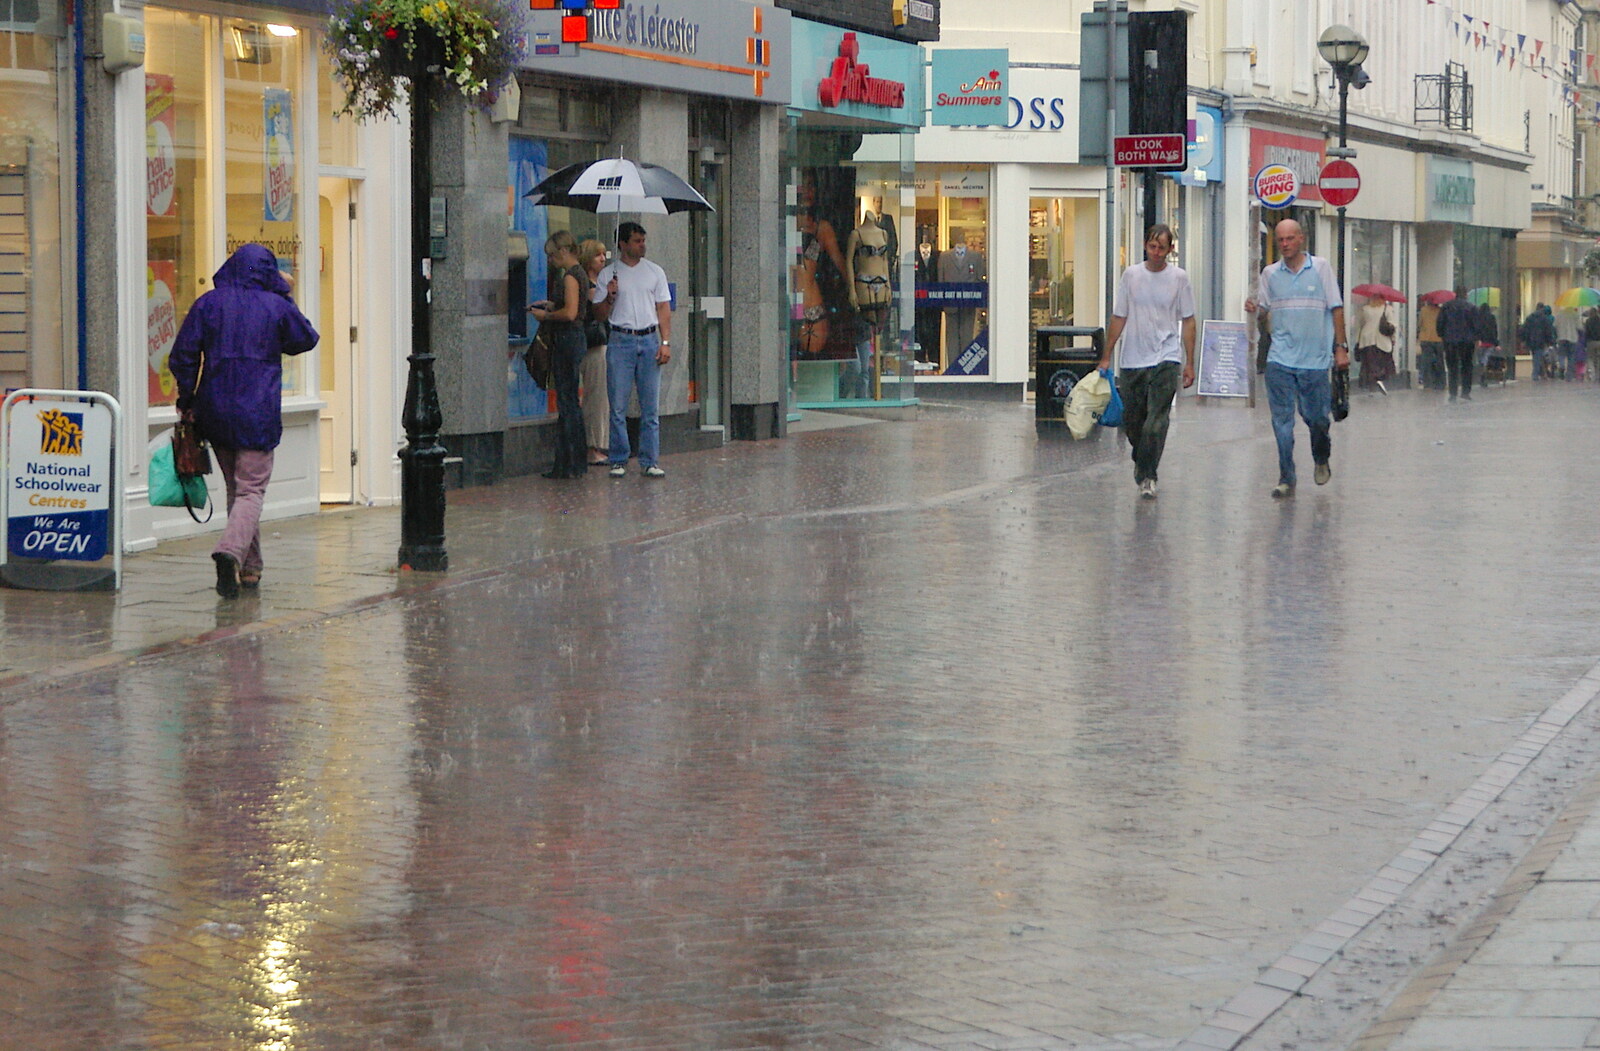 Ipswich monsoon season strikes from Cambridge Floods, Curry Night and an Ipswich Monsoon - 10th September 2005